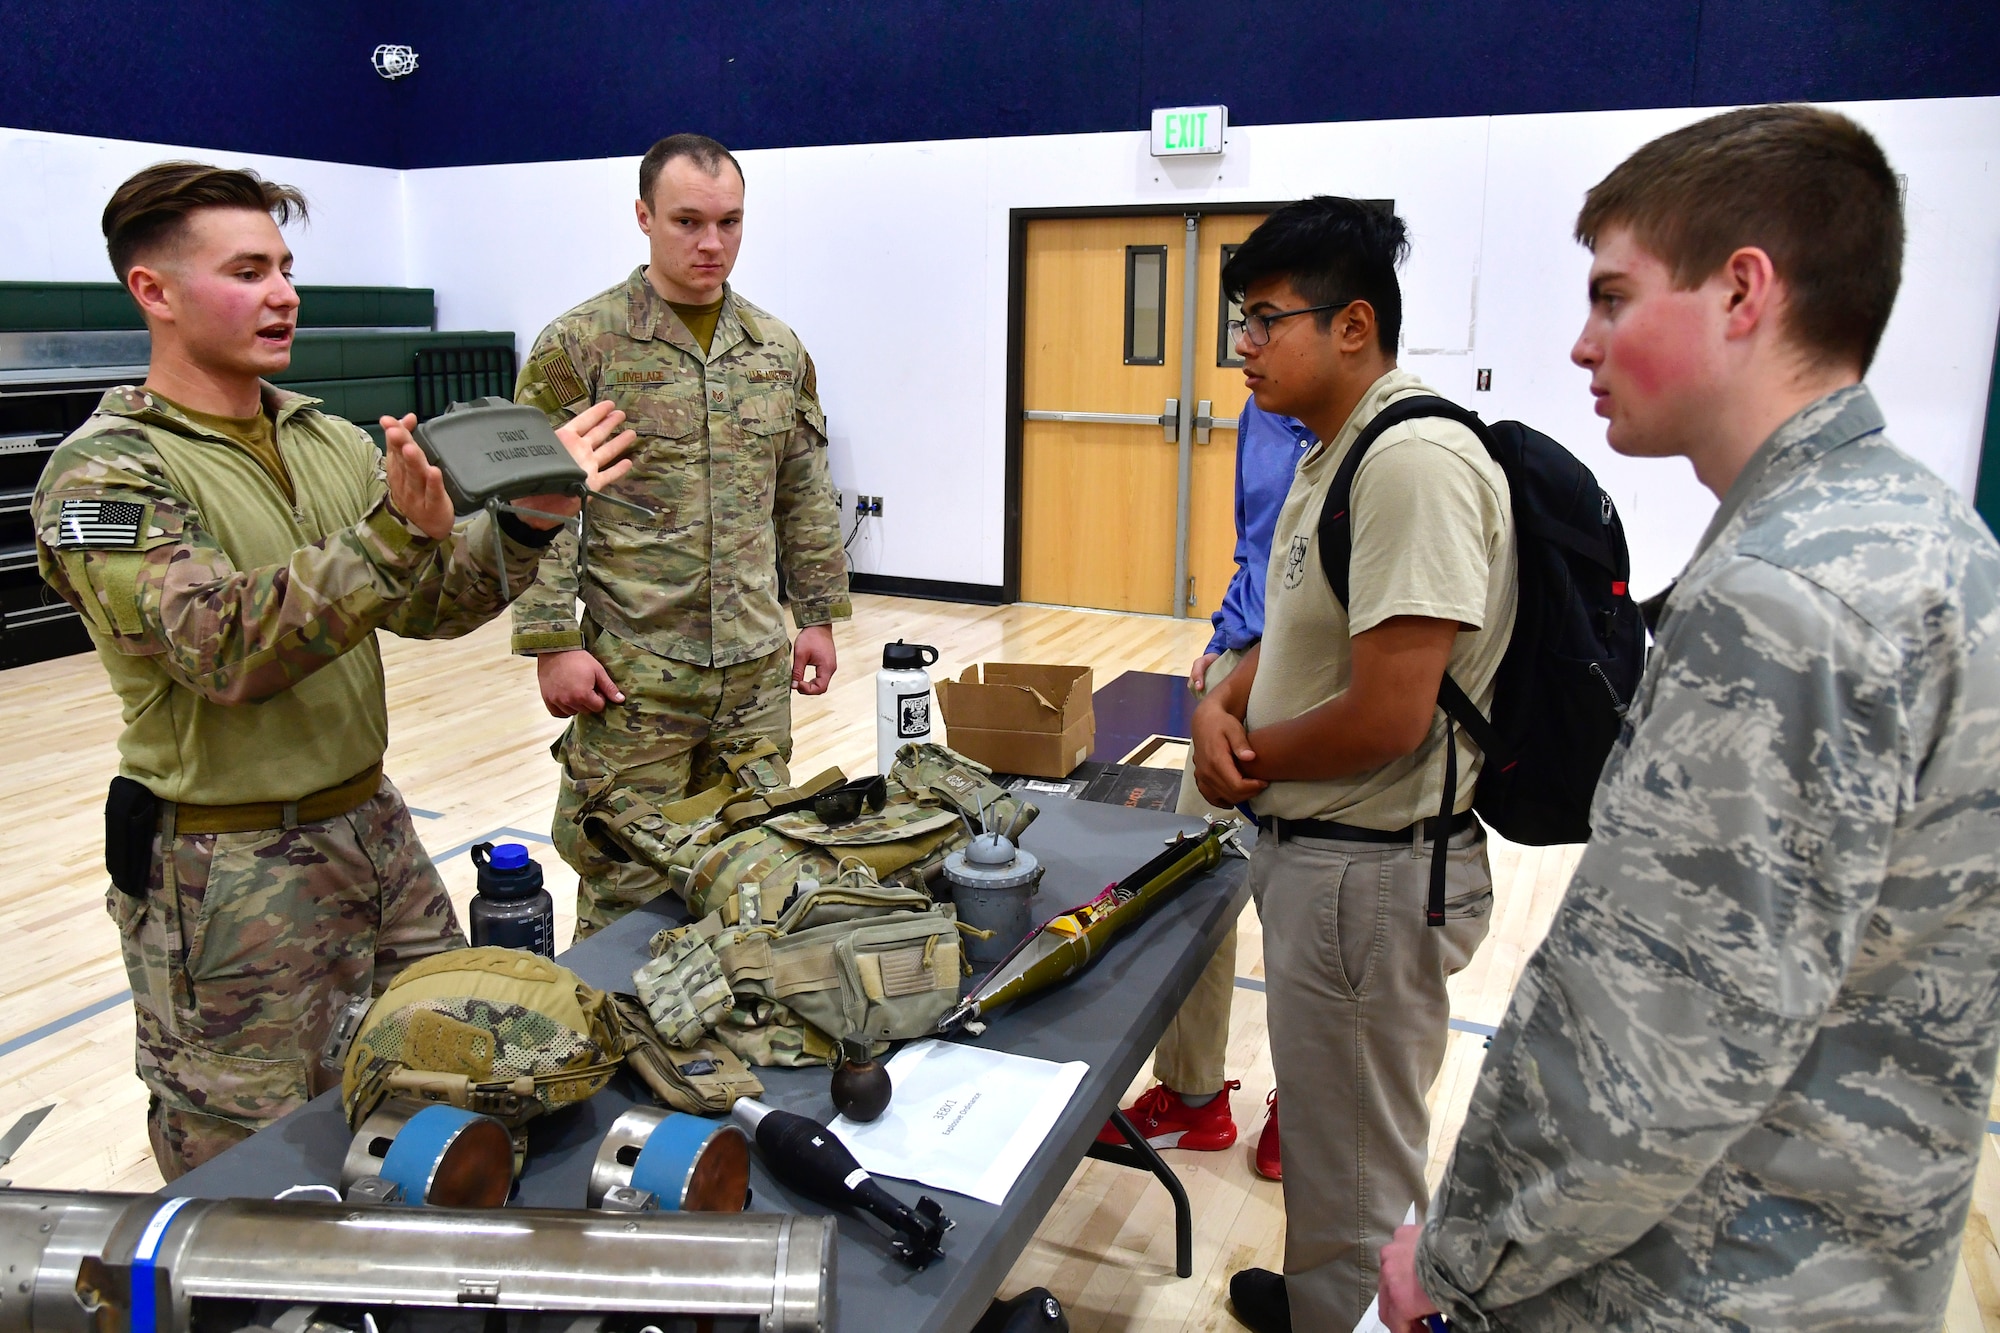 Airman First Class William Galuszka, 775th Civil Engineering Squadron, speaks with students about explosive devices while participating in a job fair at the Utah Military Academy, May 25, 2021, in Riverdale Utah. Airmen from Hill Air Force Base recently hosted the event at the nearby charter high school to educate and inspire students, as well as promote interest in the possibility of future military careers. (U.S. Air Force photo by Todd Cromar)